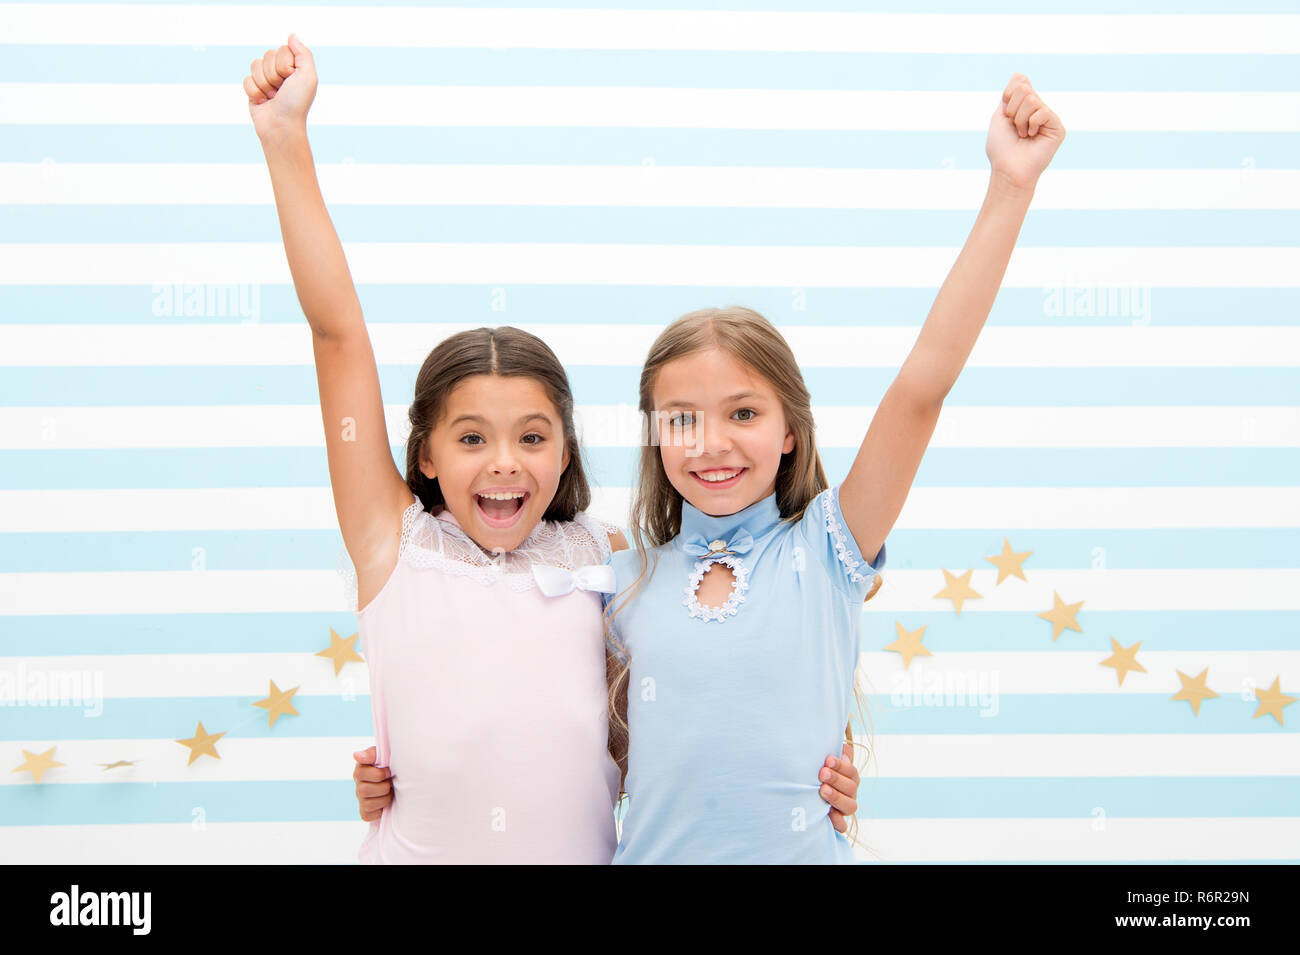 Live happy moments together. Kids schoolgirls preteens happy together. Friendship from childhood. Girls smiling happy faces hug each other stand striped background. Girls children best friends hug. Stock Photo